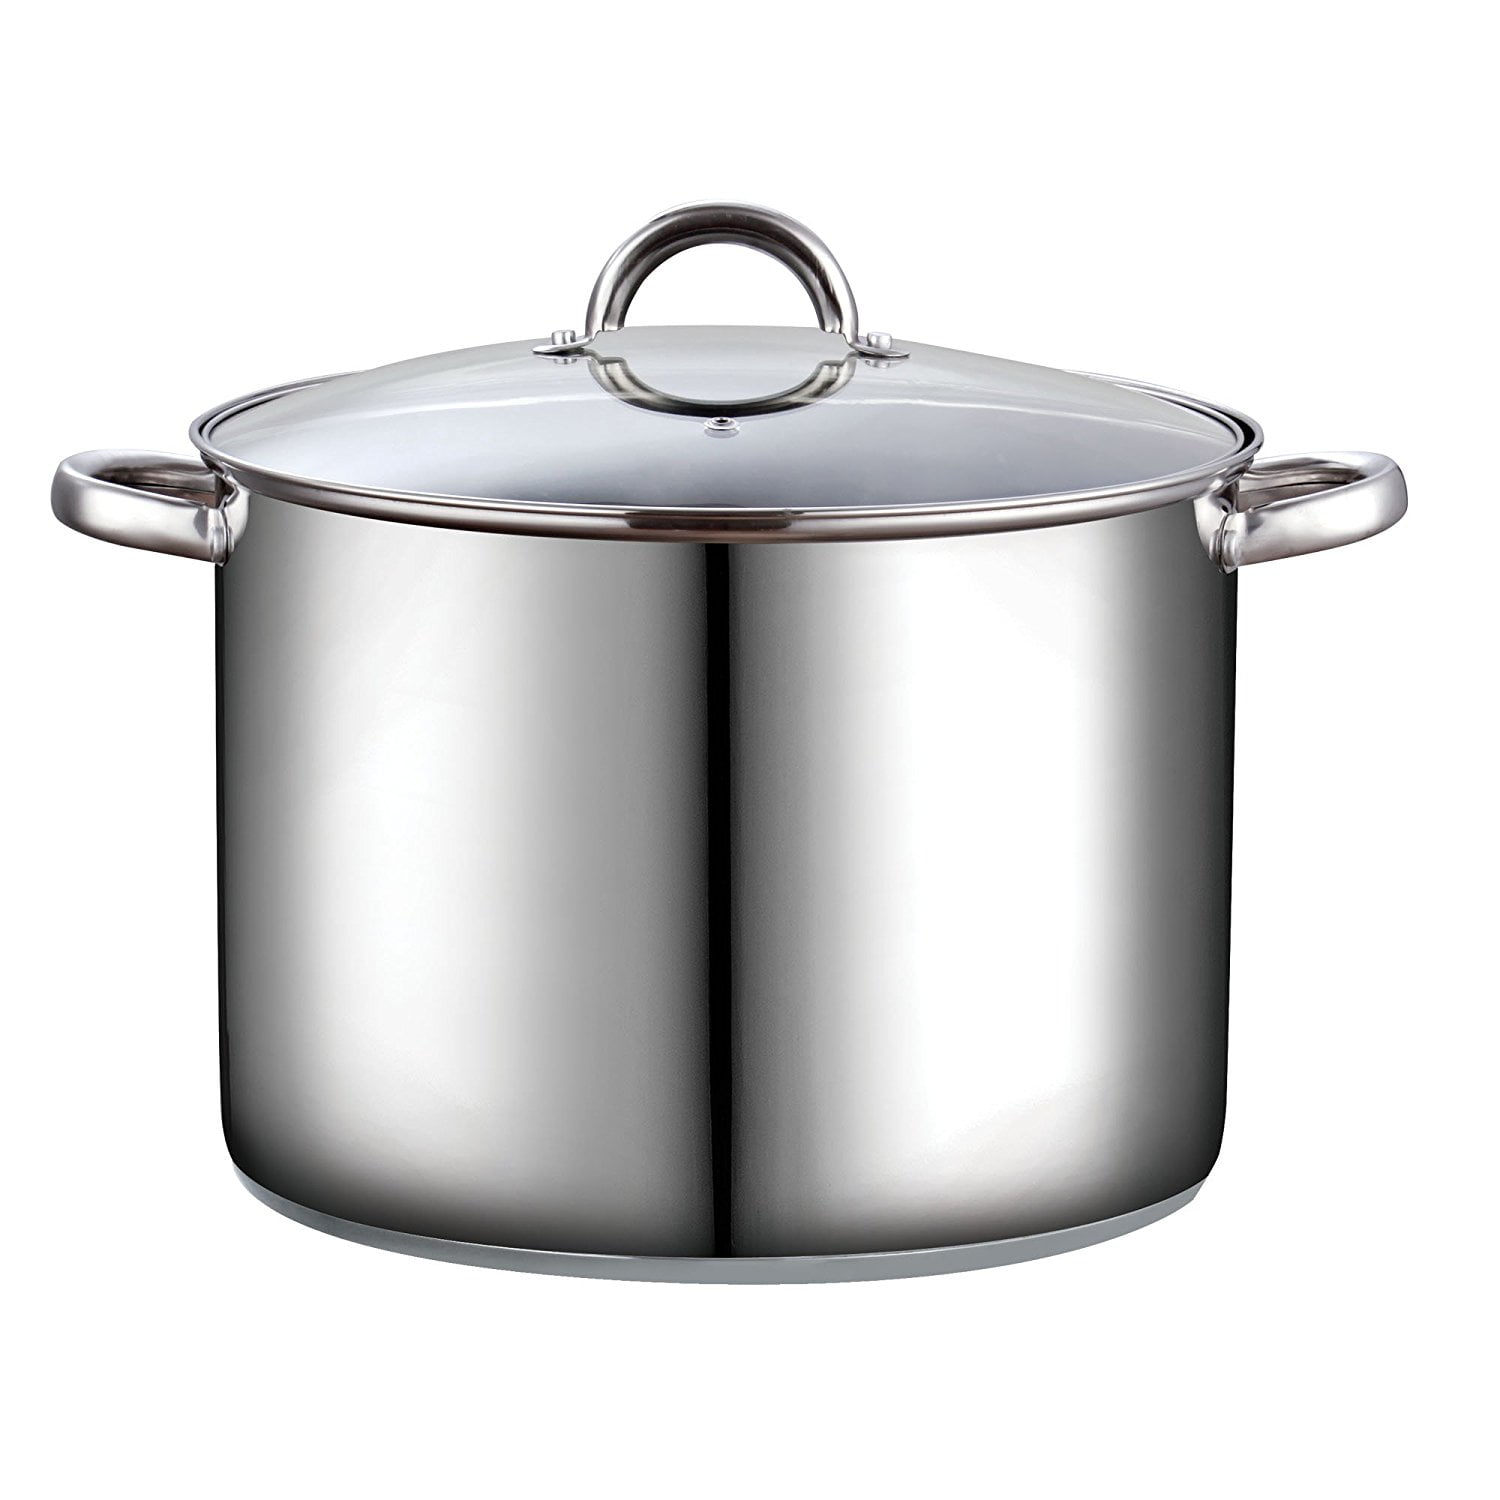 Cook N Home 16 Quart Stainless Steel Stockpot with Lid - Walmart.com Cook N Home Stainless Steel Stockpot